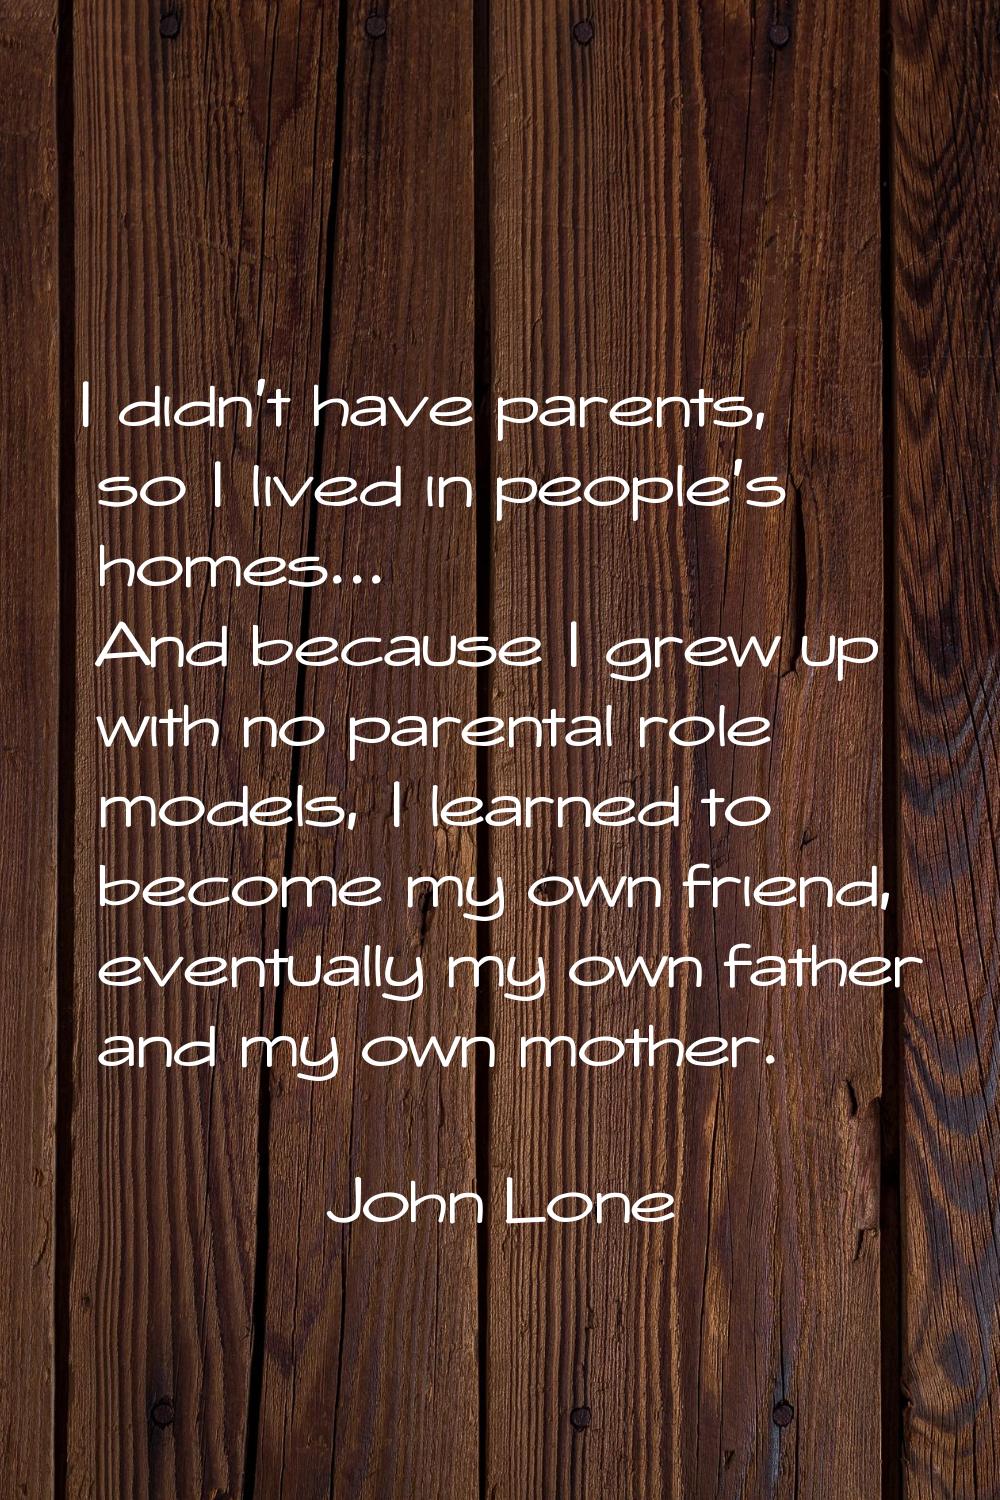 I didn't have parents, so I lived in people's homes... And because I grew up with no parental role 